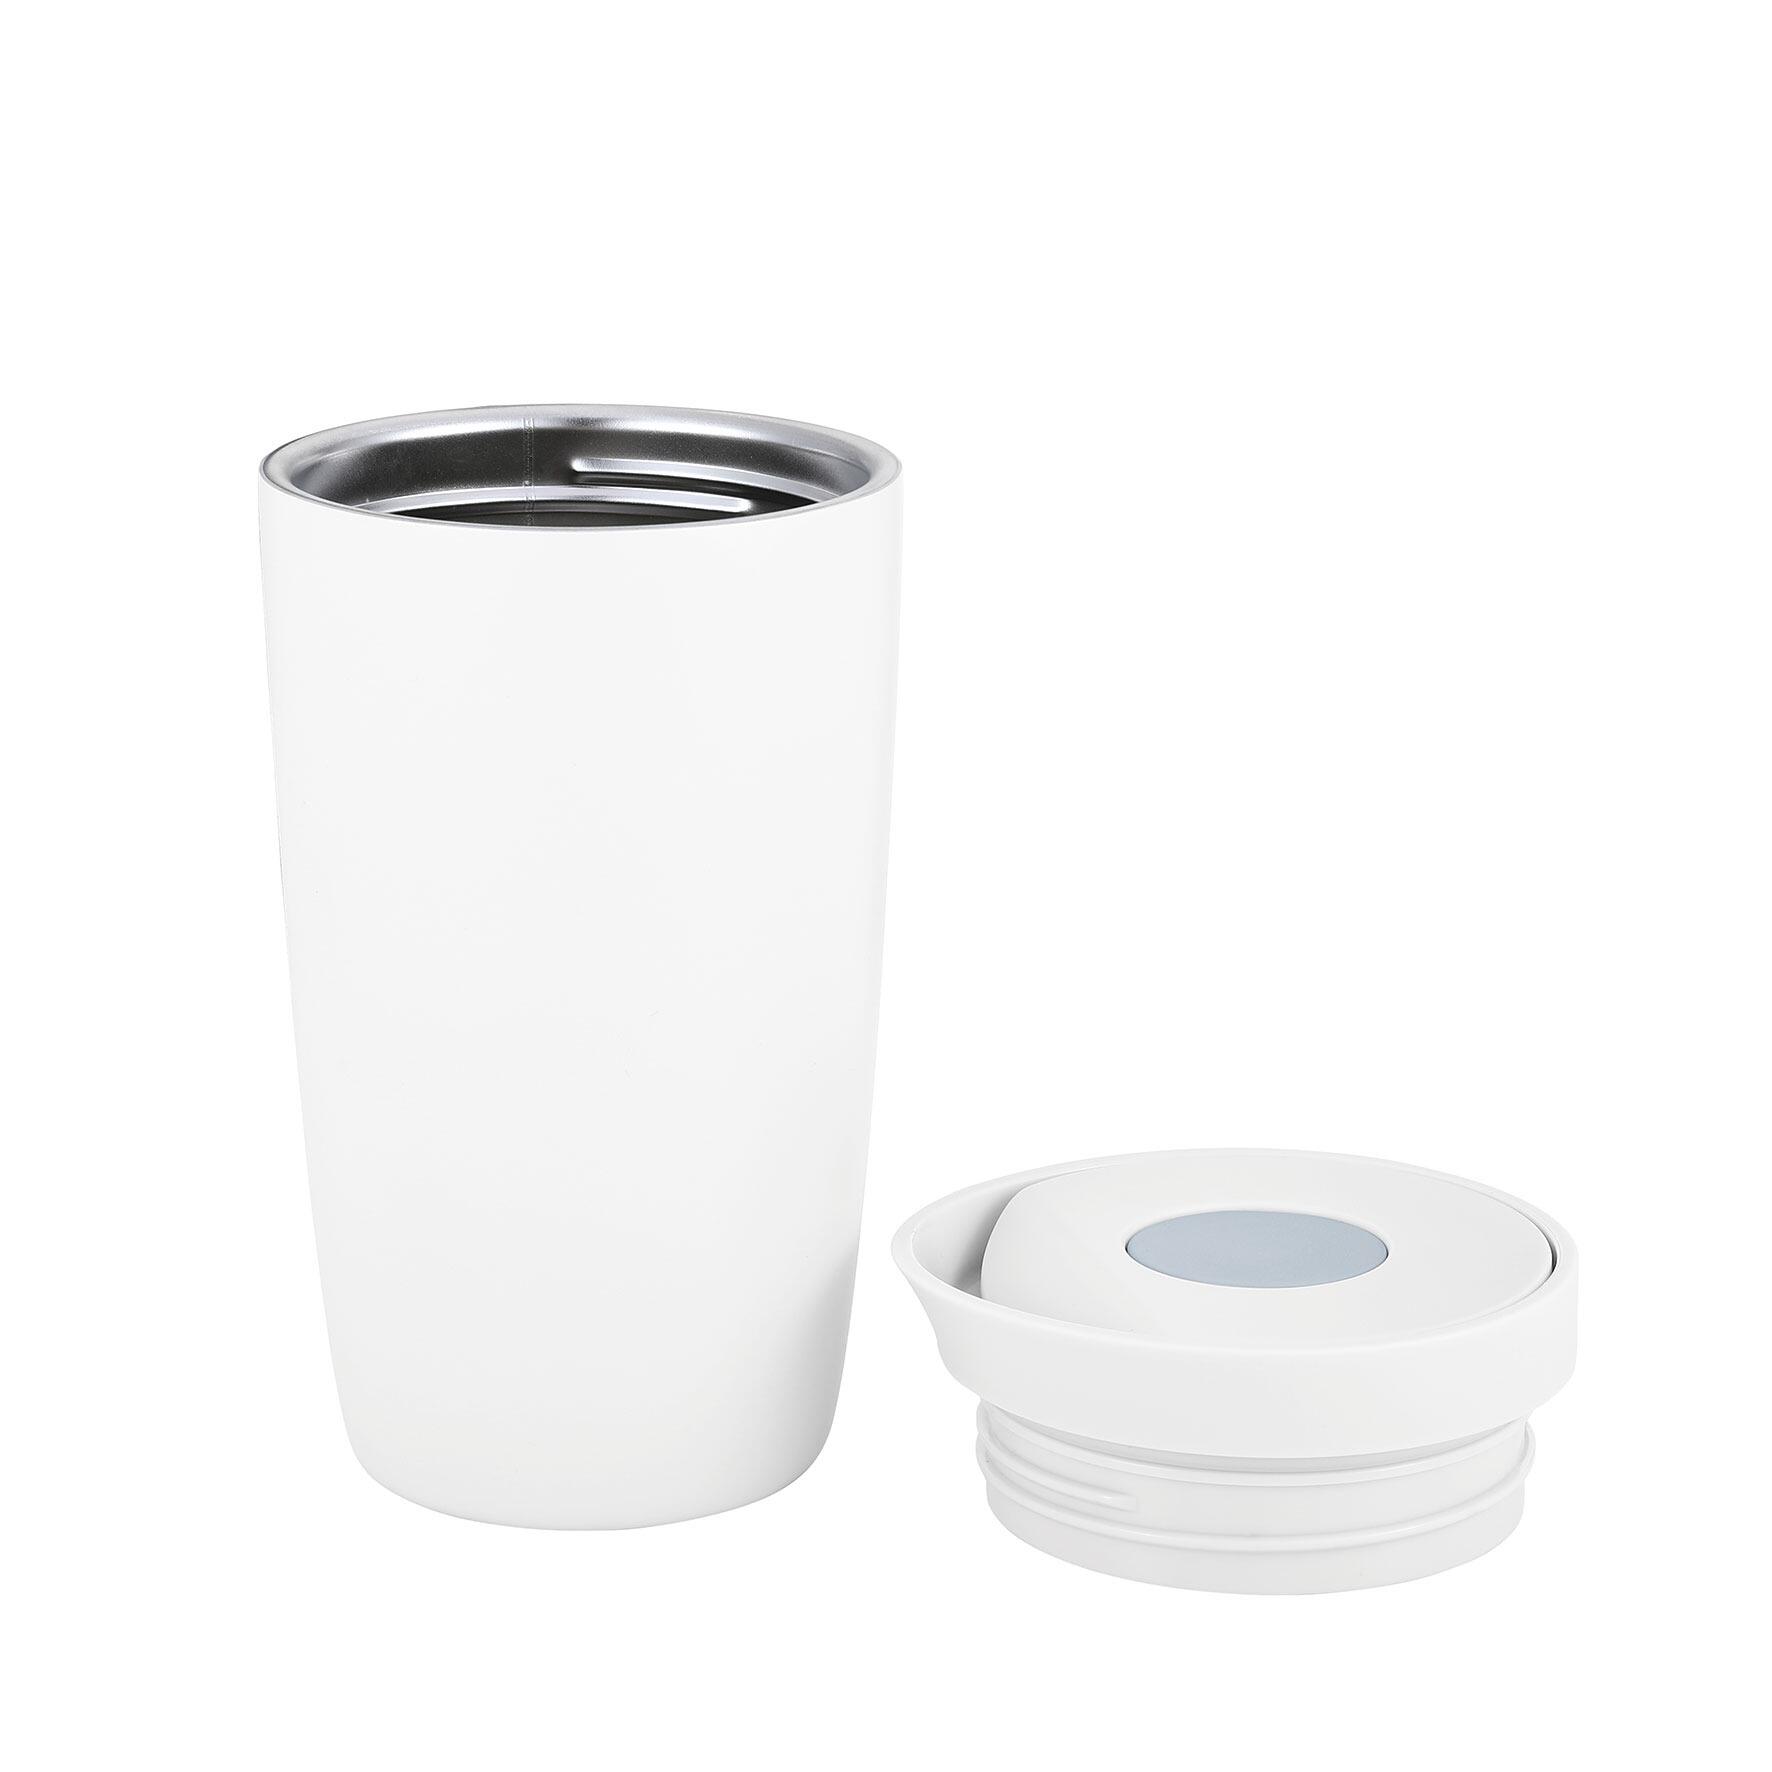 Radius Leakproof Double Wall Stainless Steel Travel Cup - White